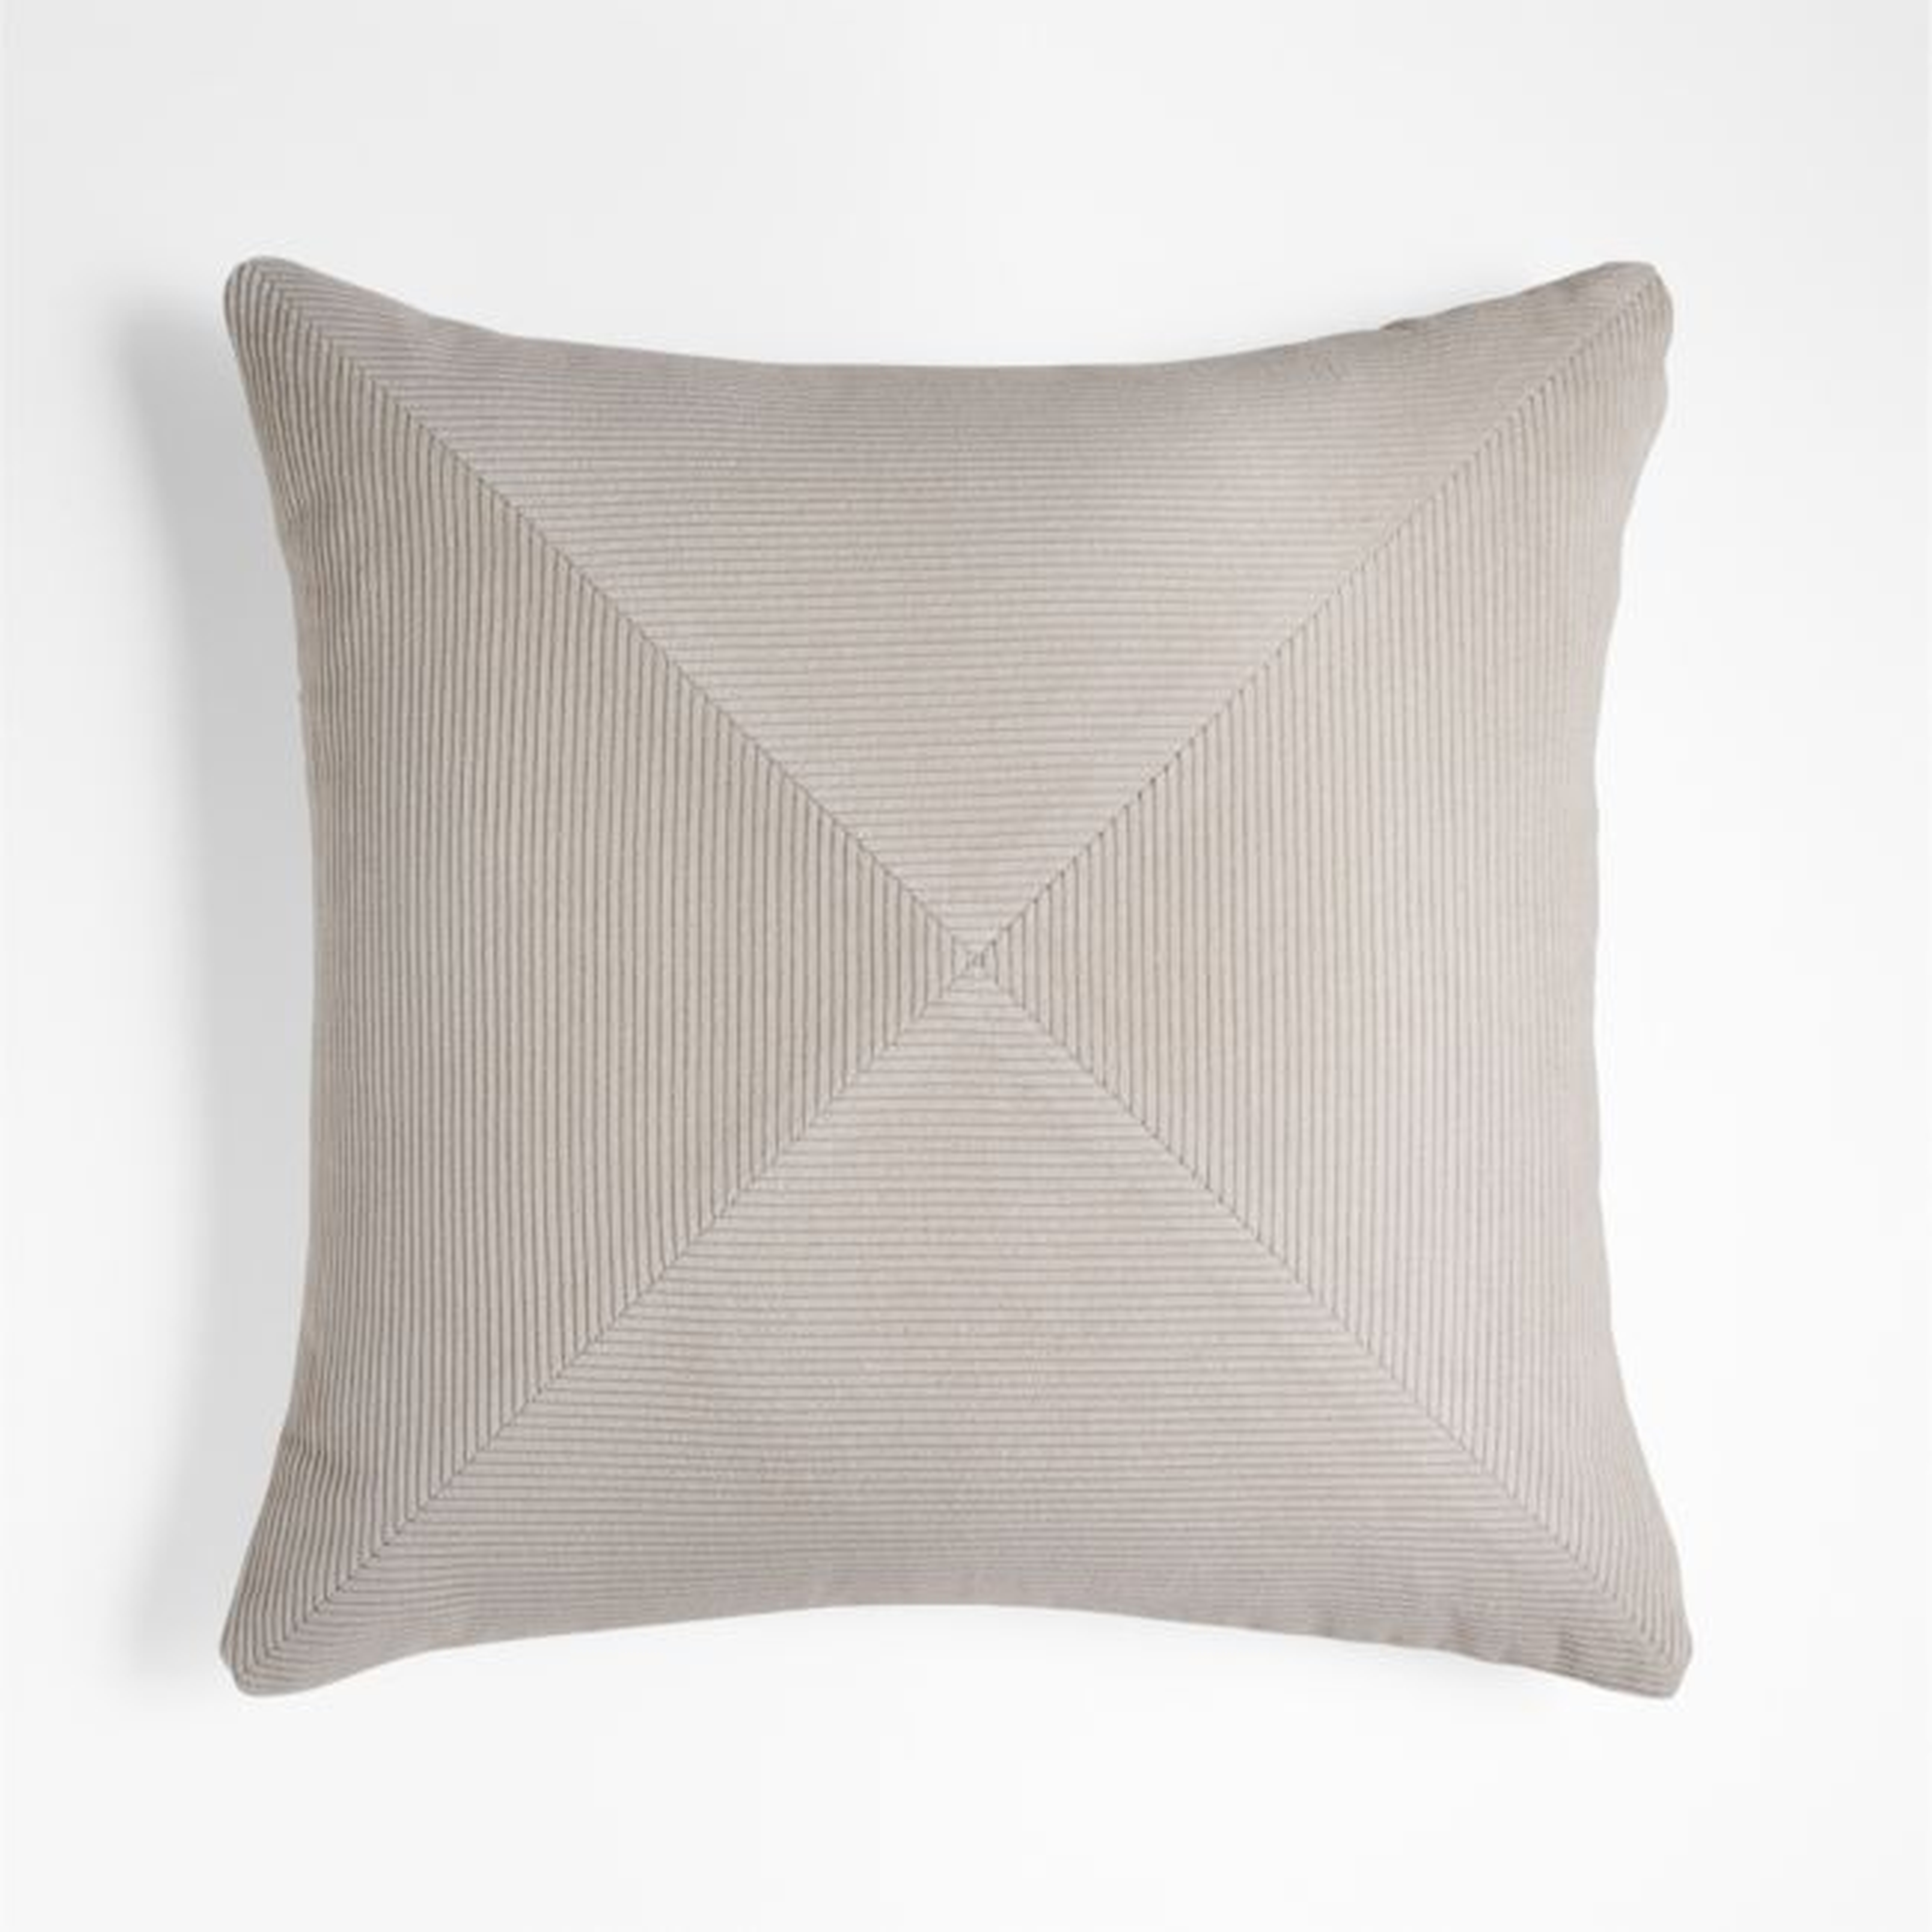 Cordell 20" White Corduroy Pillow Cover - Crate and Barrel